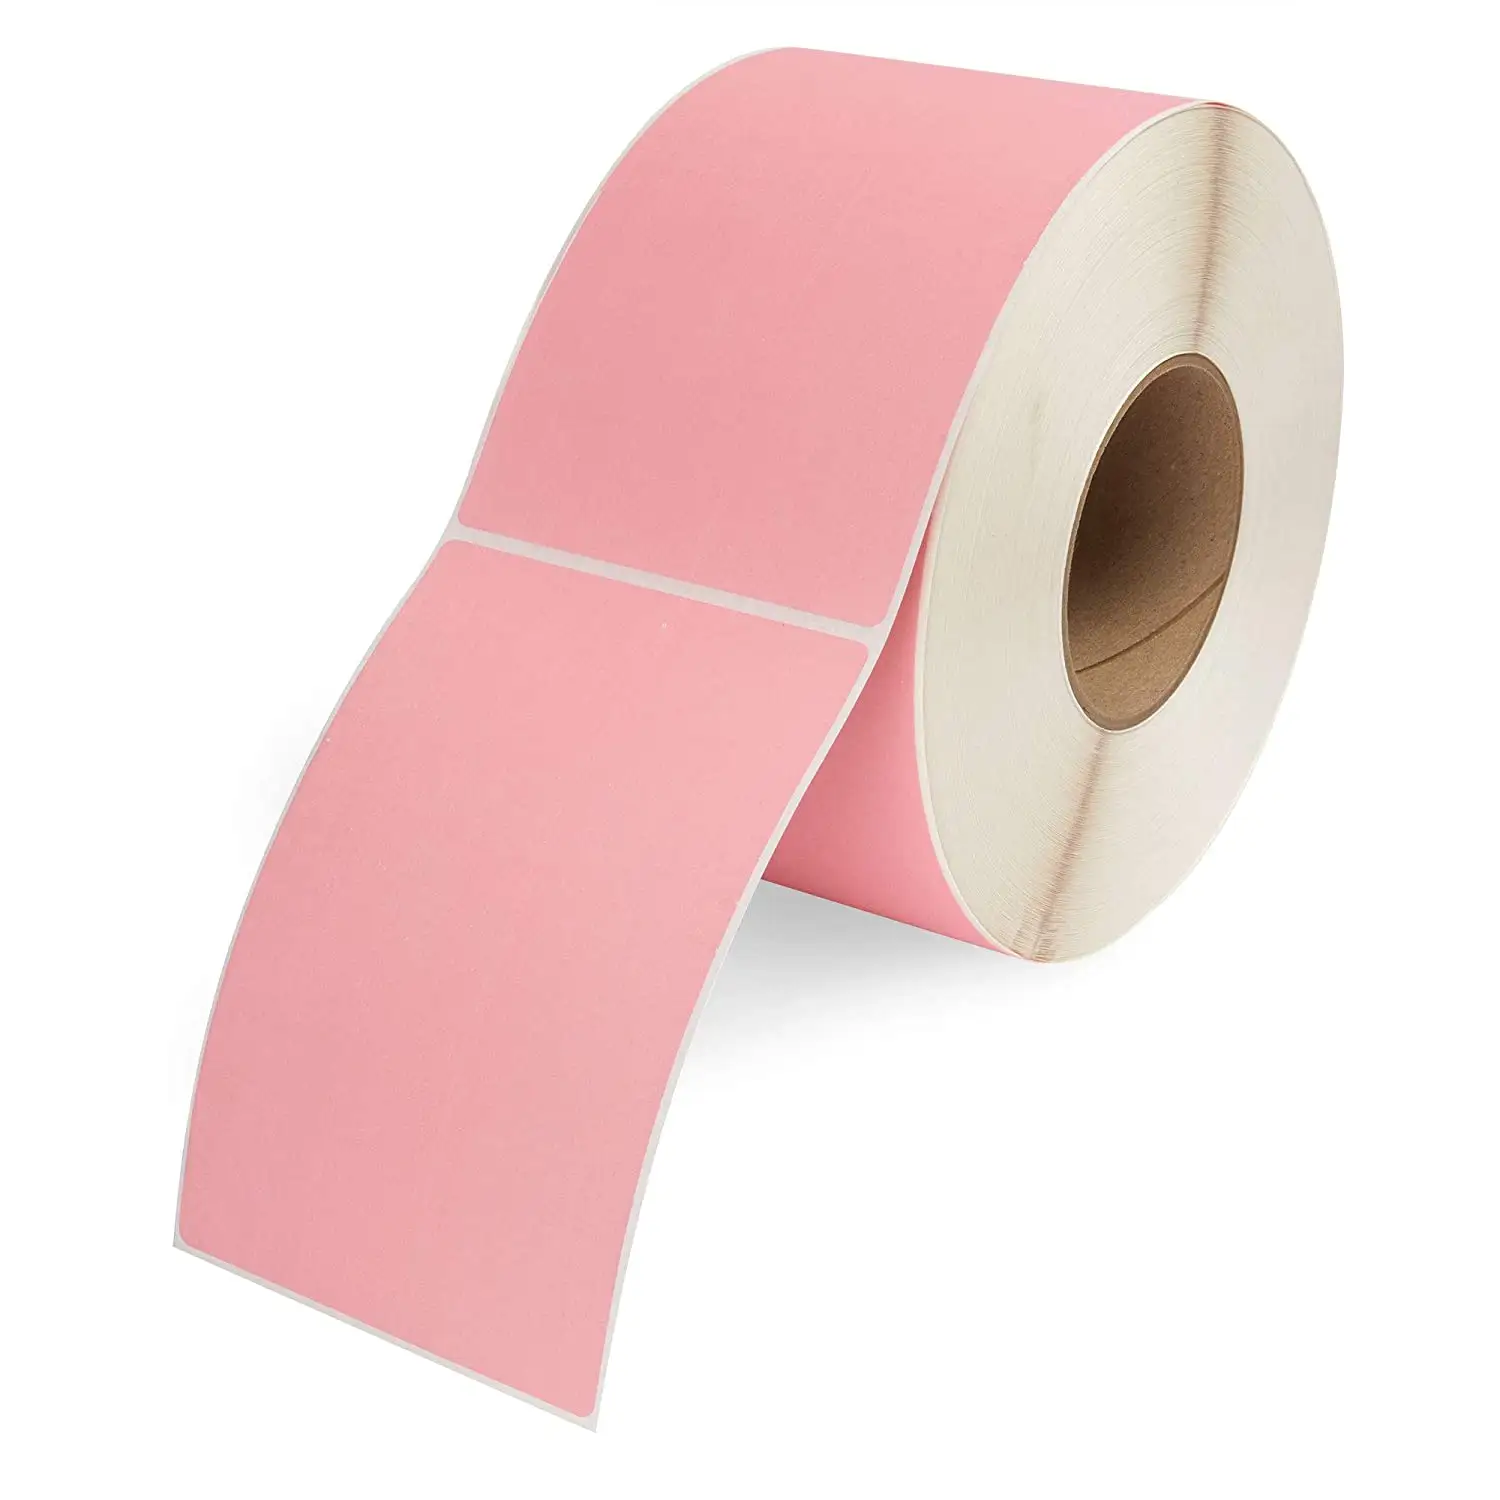 Waterproof Adhesive Direct Thermal Paper Roll Waybill Logistics Label A6 Sticker 100 X 150 Pink Thermal Labels 4 x 6